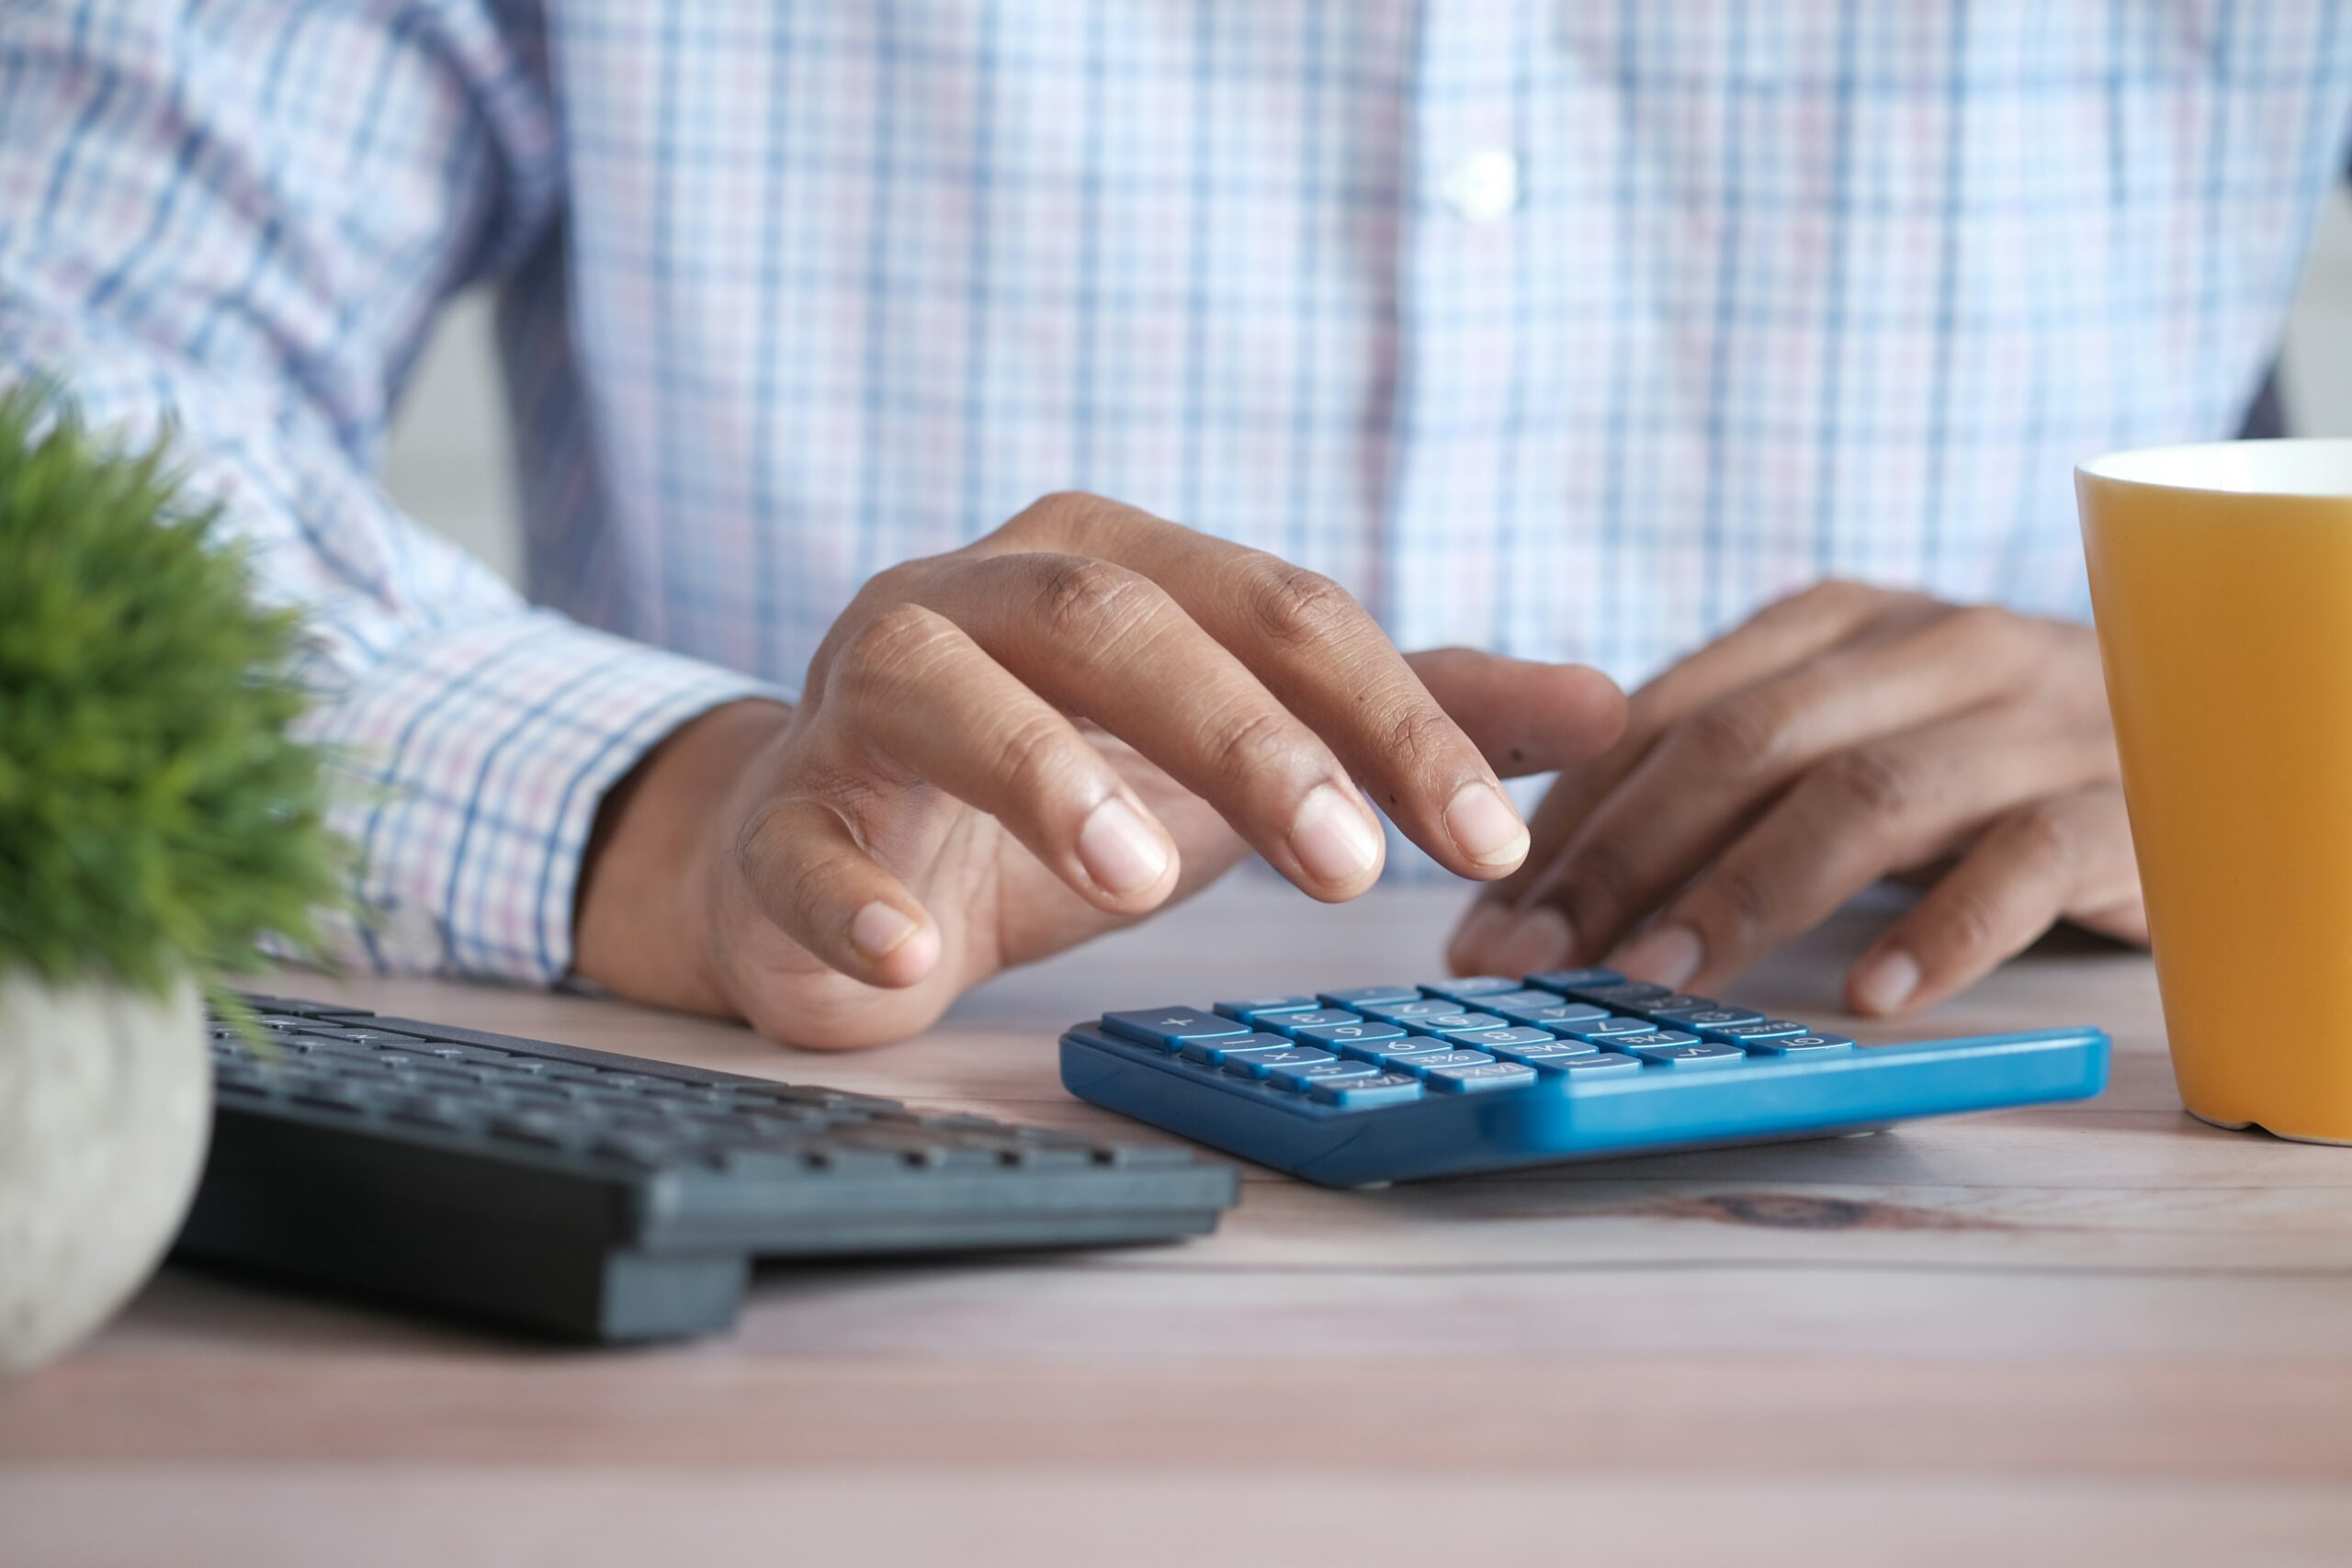 A close-up of a person using a calculator at a desk. The individual is wearing a checkered shirt, and their hand is pressing buttons on the calculator. Nearby, there is a keyboard, a small potted plant, and a yellow coffee mug. The scene suggests a focused work environment, likely involving financial calculations or data entry.